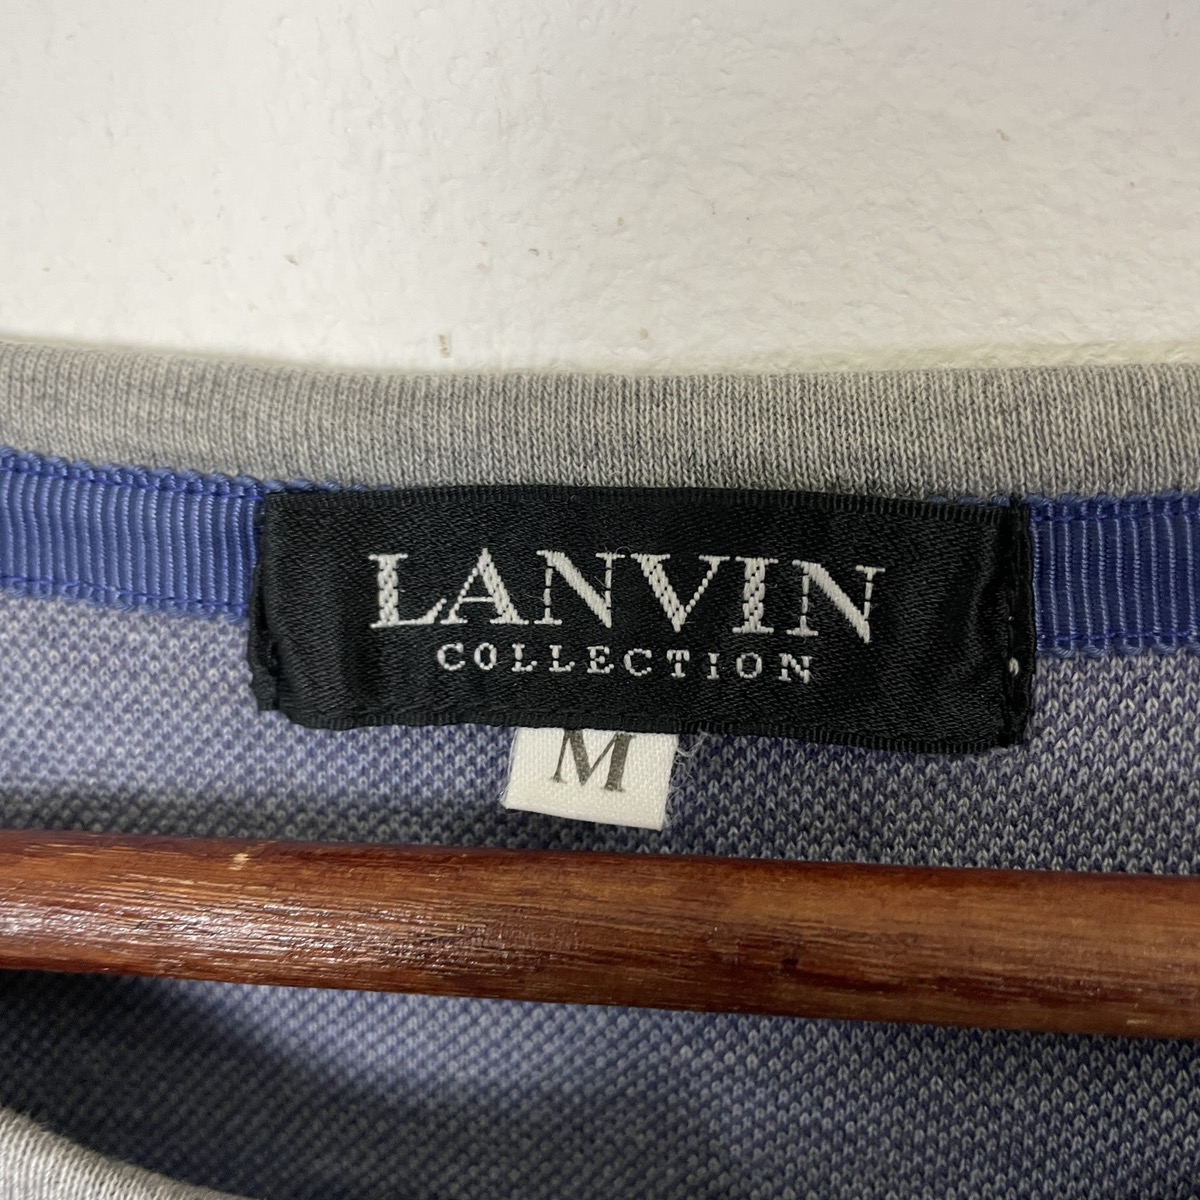 Vintage Lanvin Collection Long Sleeve Tee - 6